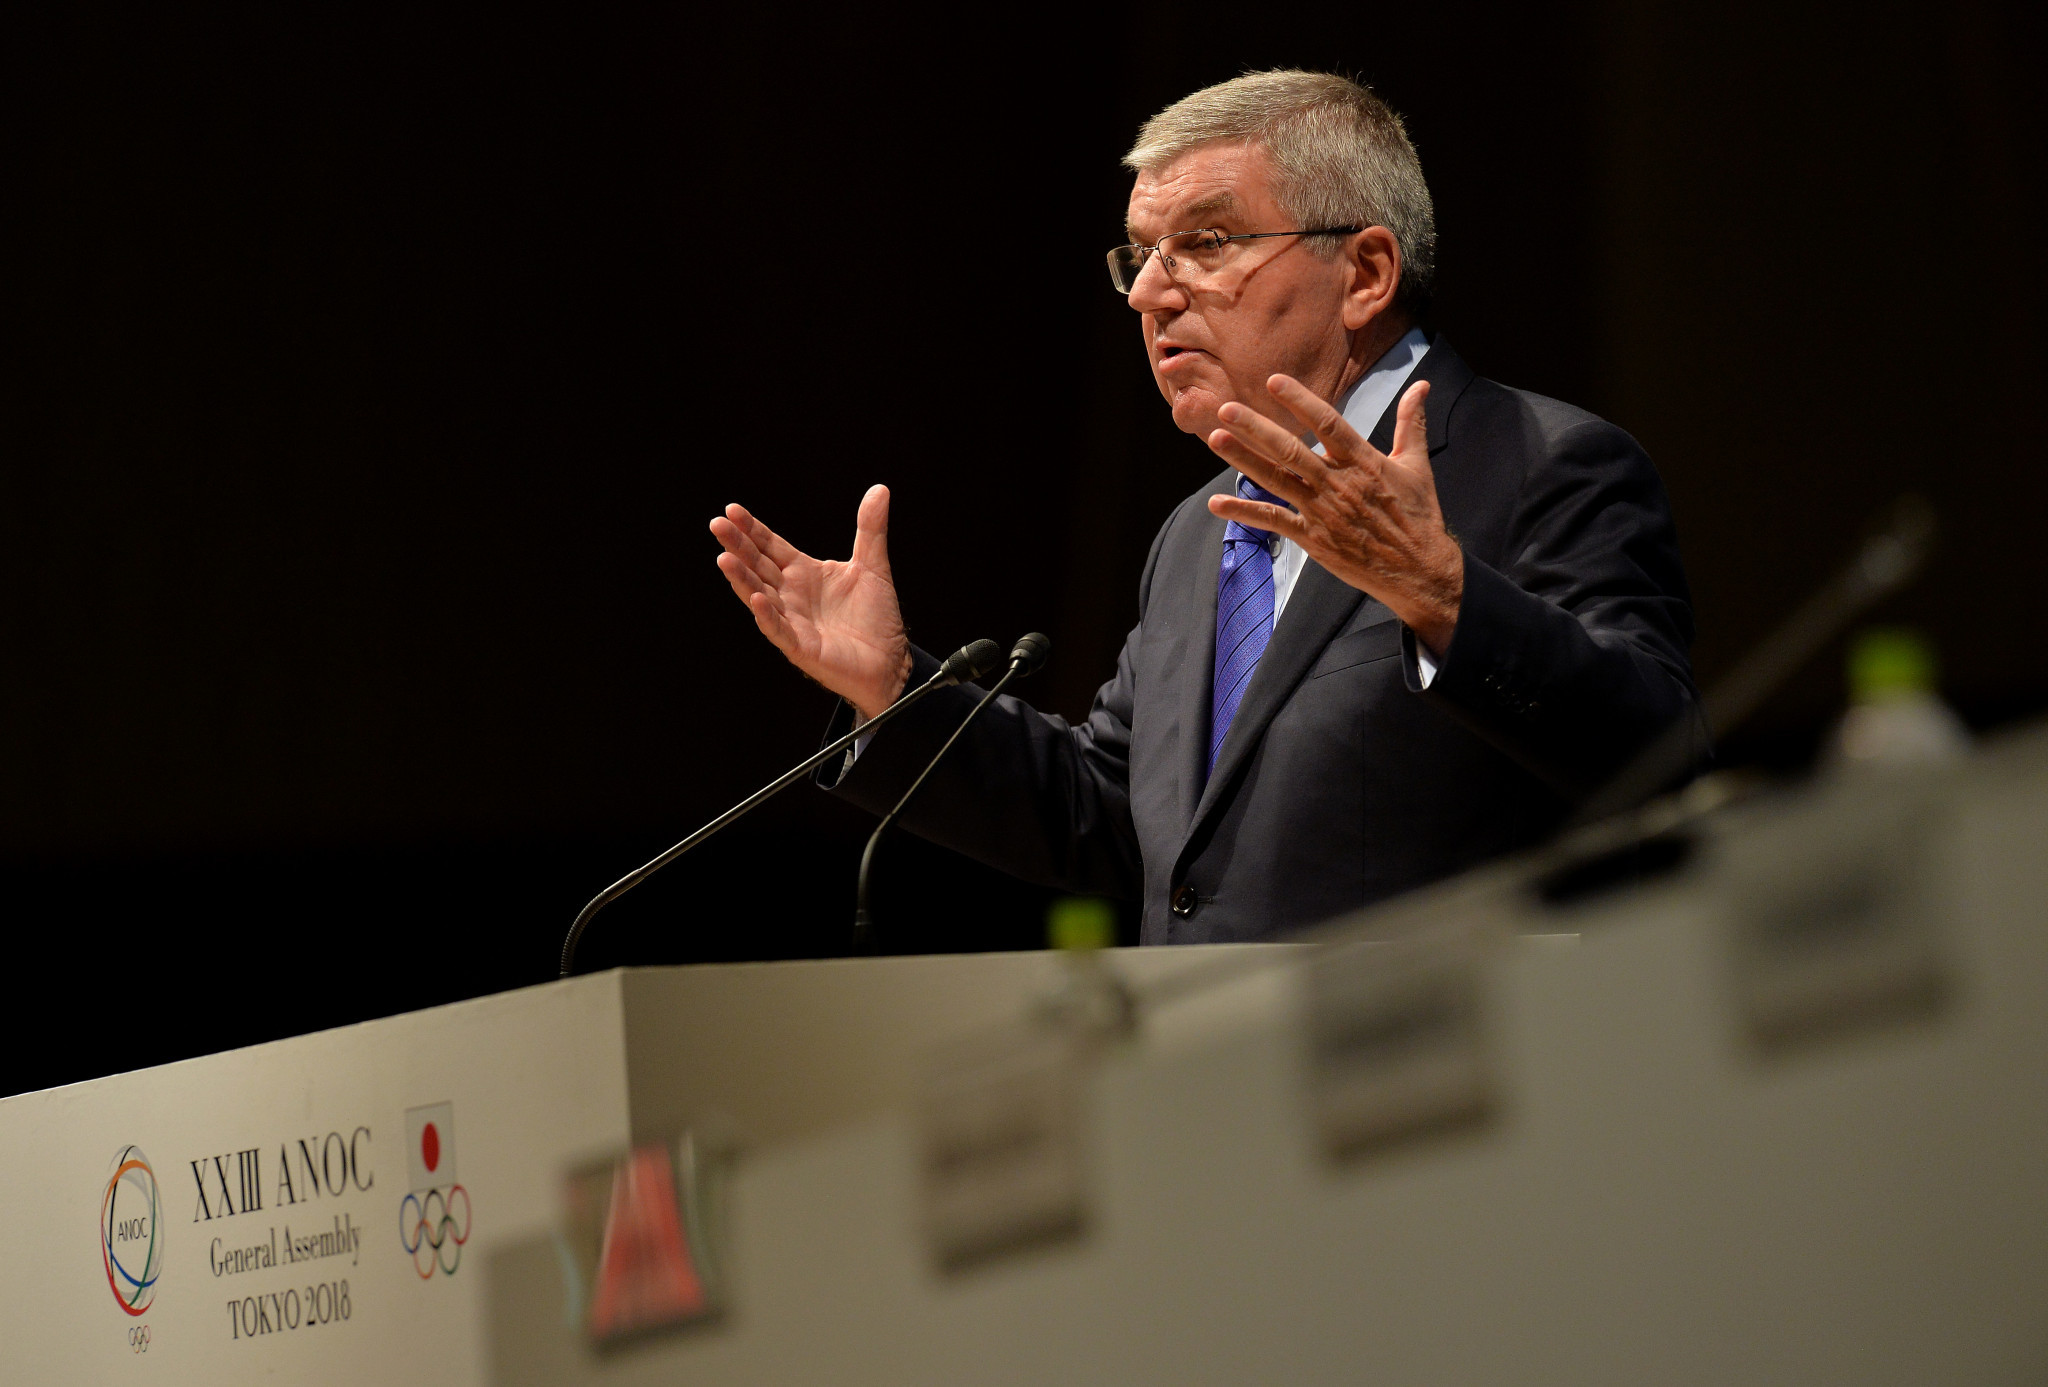 IOC President Thomas Bach gave a keynote speech on the second day of the ANOC General Assembly ©Getty Images